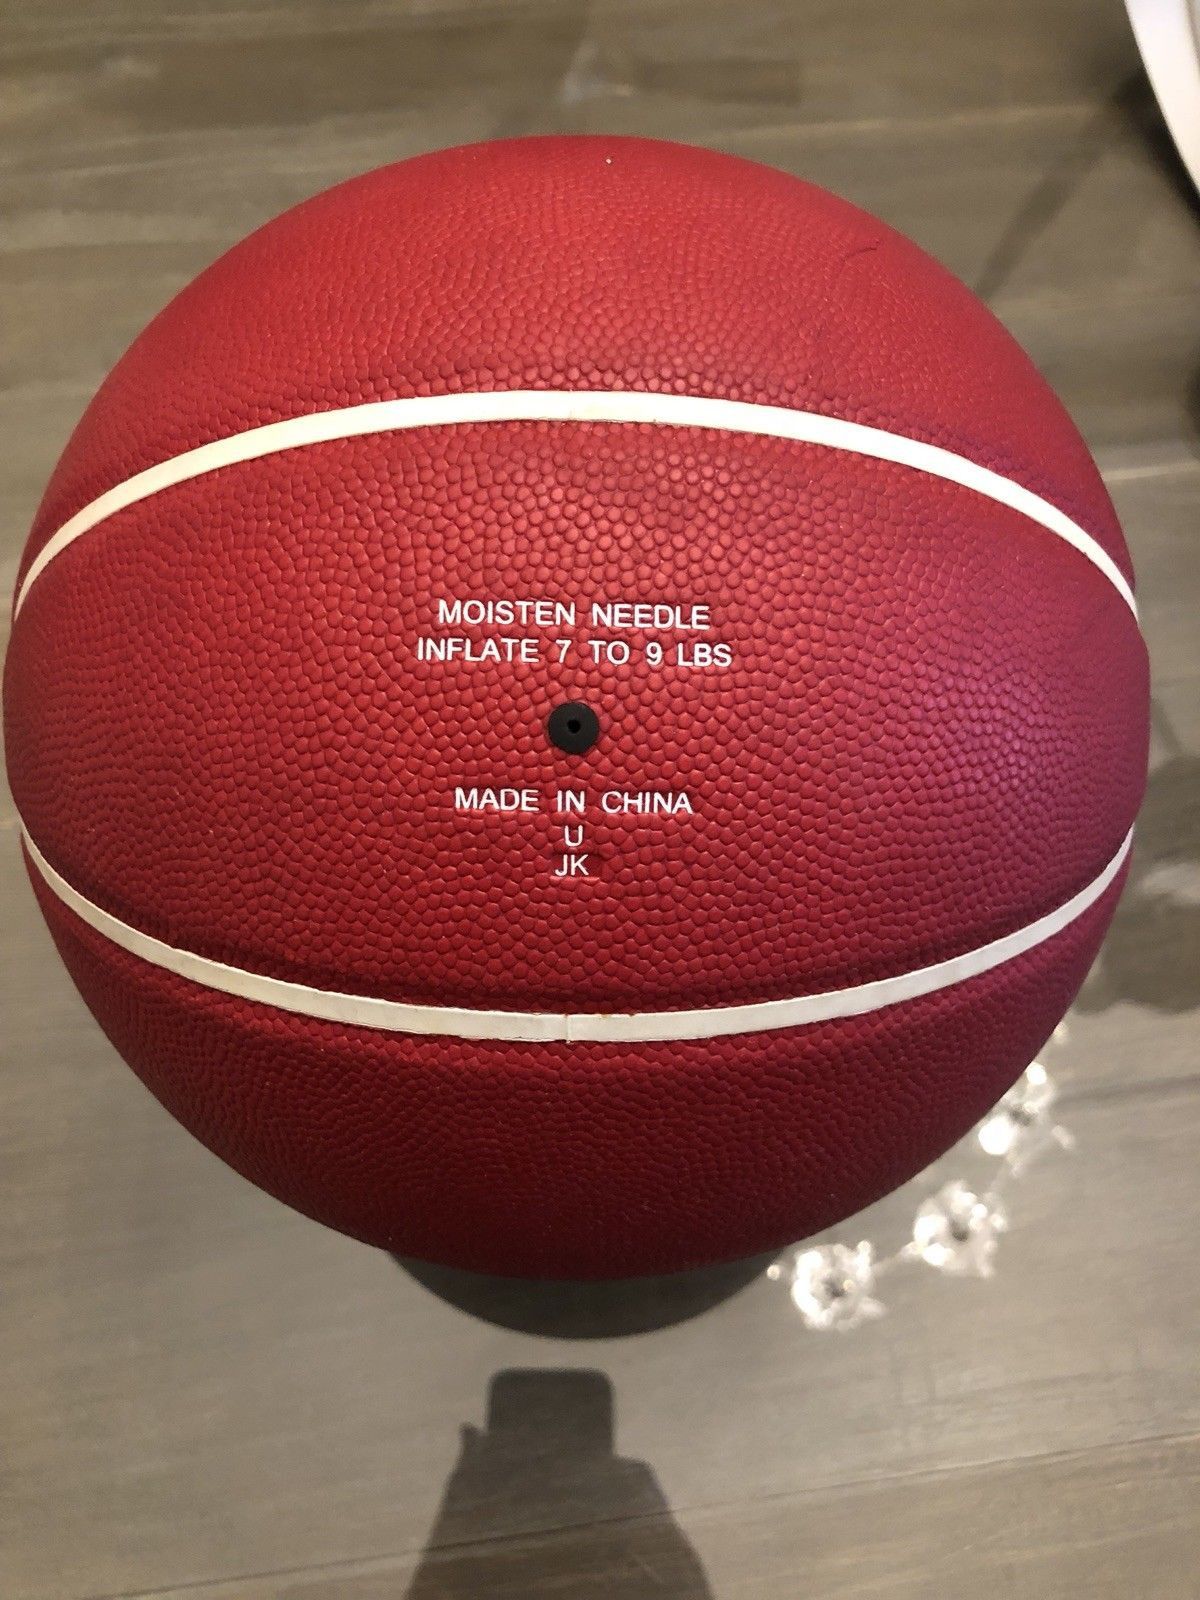 Supreme Supreme Red Spalding Basketball Size ONE SIZE - 2 Preview